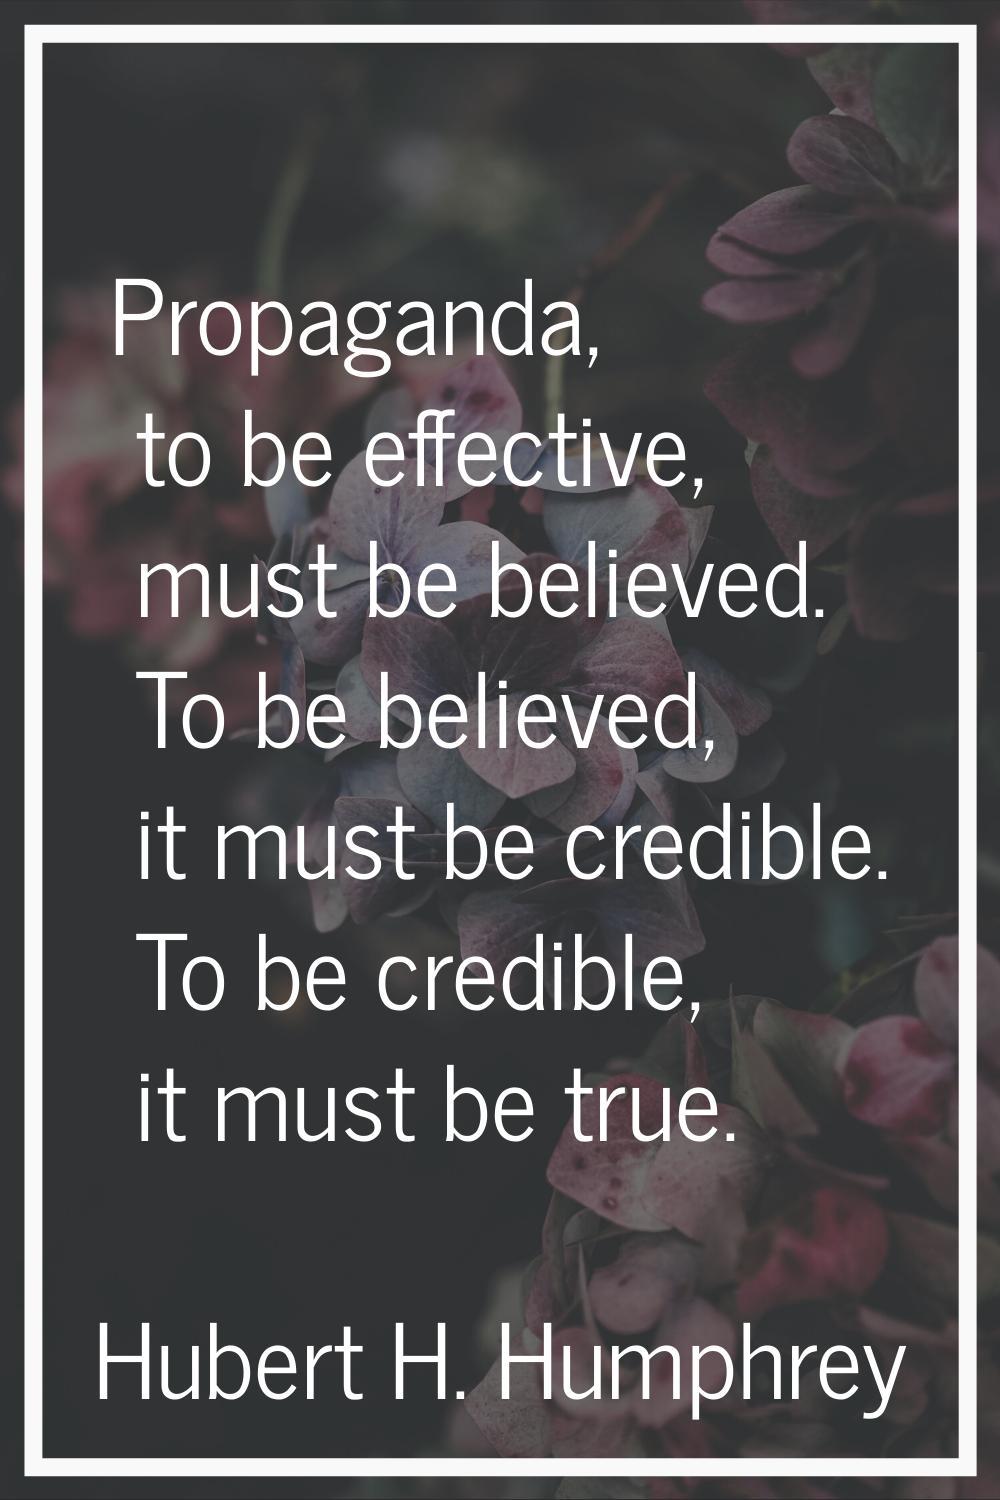 Propaganda, to be effective, must be believed. To be believed, it must be credible. To be credible,